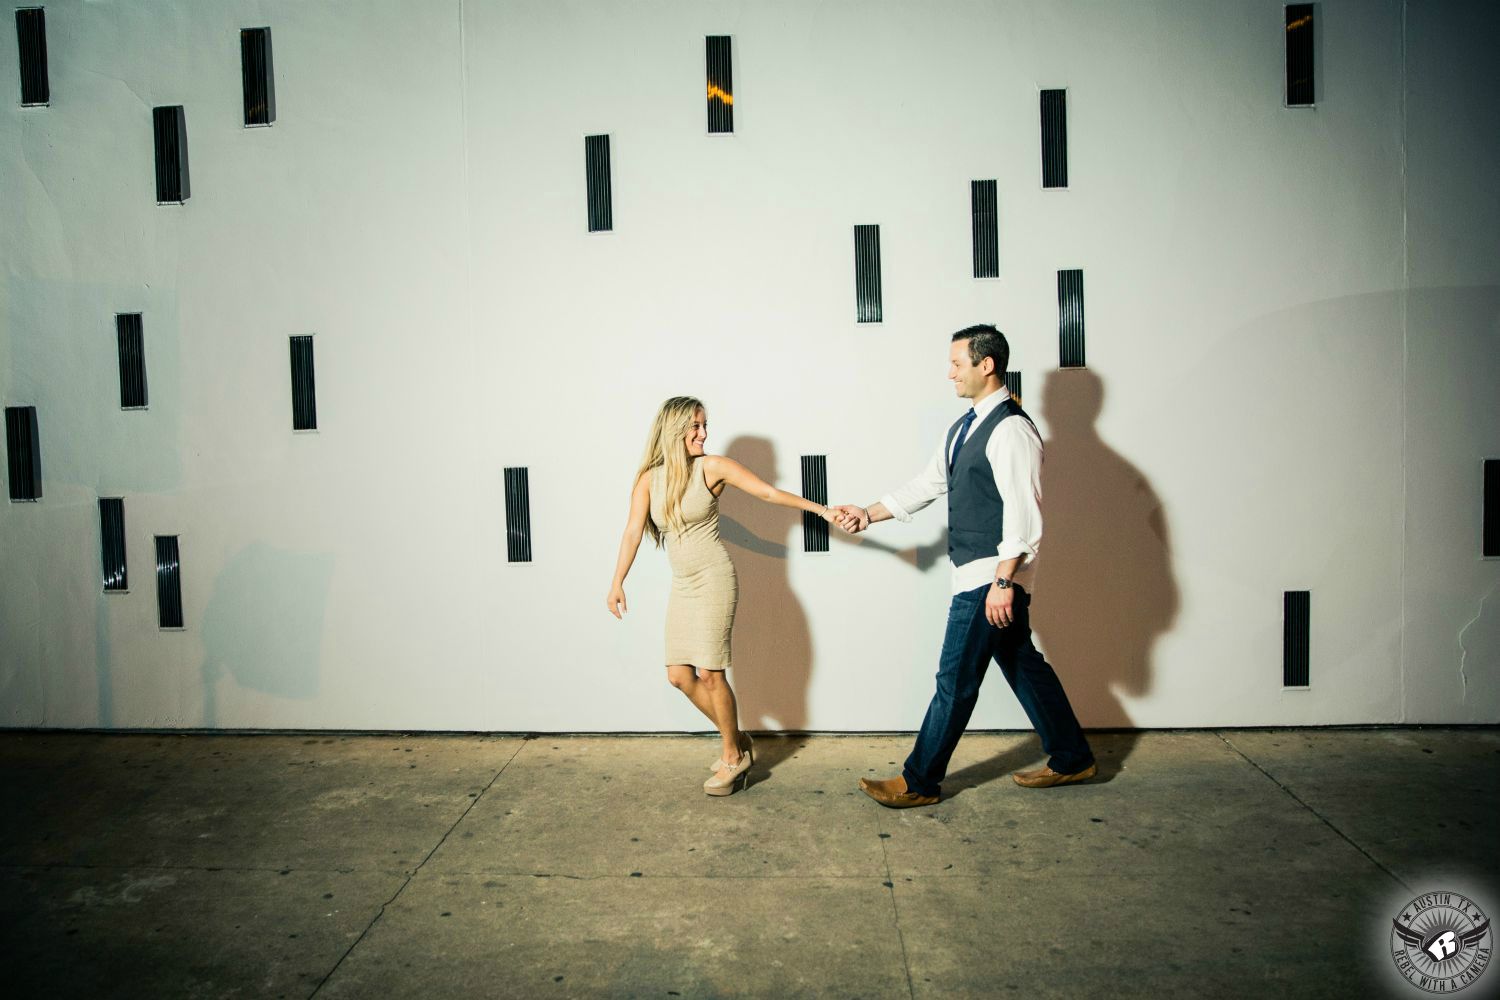 Hot, fit, petite  blond woman in a tight tan ribbed dress and tan heels holds hand with a brunette guy wearing a white untucked button up shirt with a black skinny tie, a dark grey vest, dark blue jeans and brown dress shoes while walking happily in front of white wall with colored glass blocks in this monochromatic  engagement photo at the Contemporary  Austin.